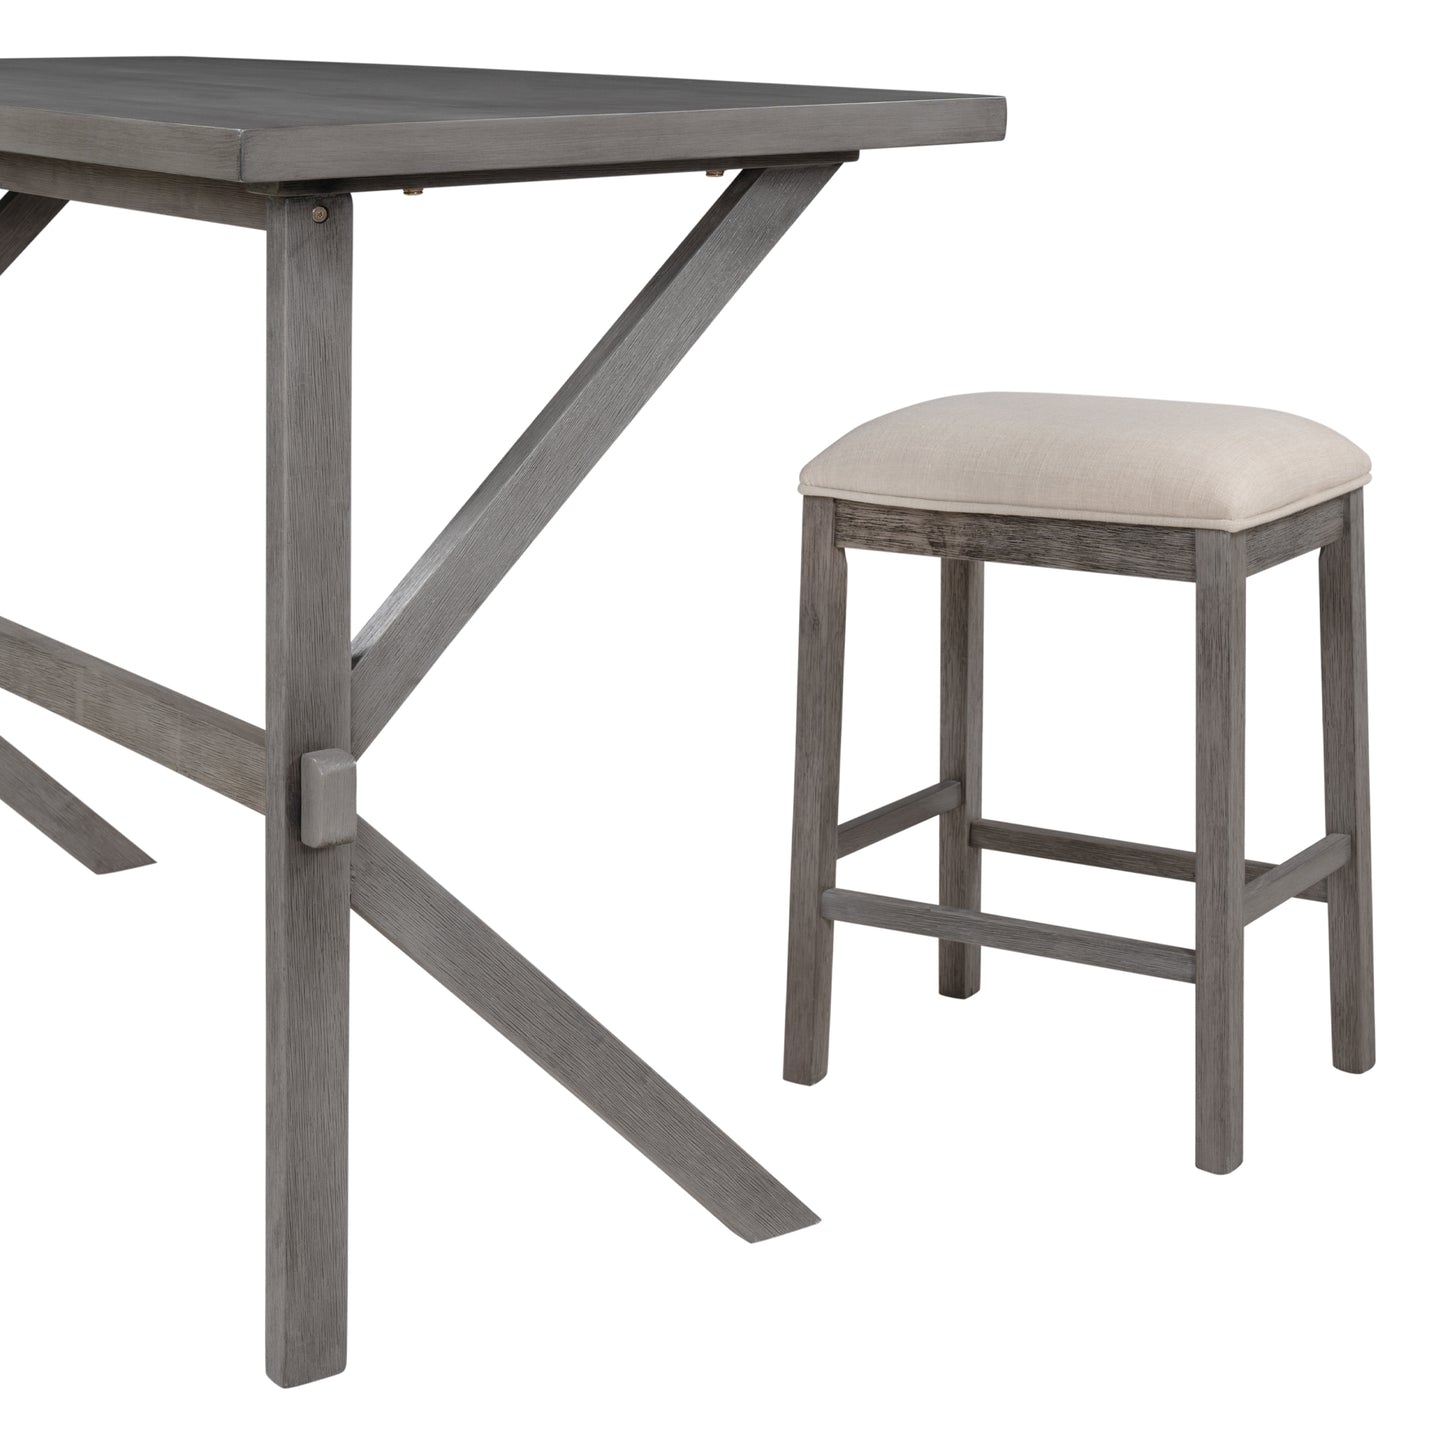 Farmhouse Rustic 3-piece Counter Height Wood Kitchen Dining Table Set with 2 Stools for Small Places, Gray+Beige Cushion